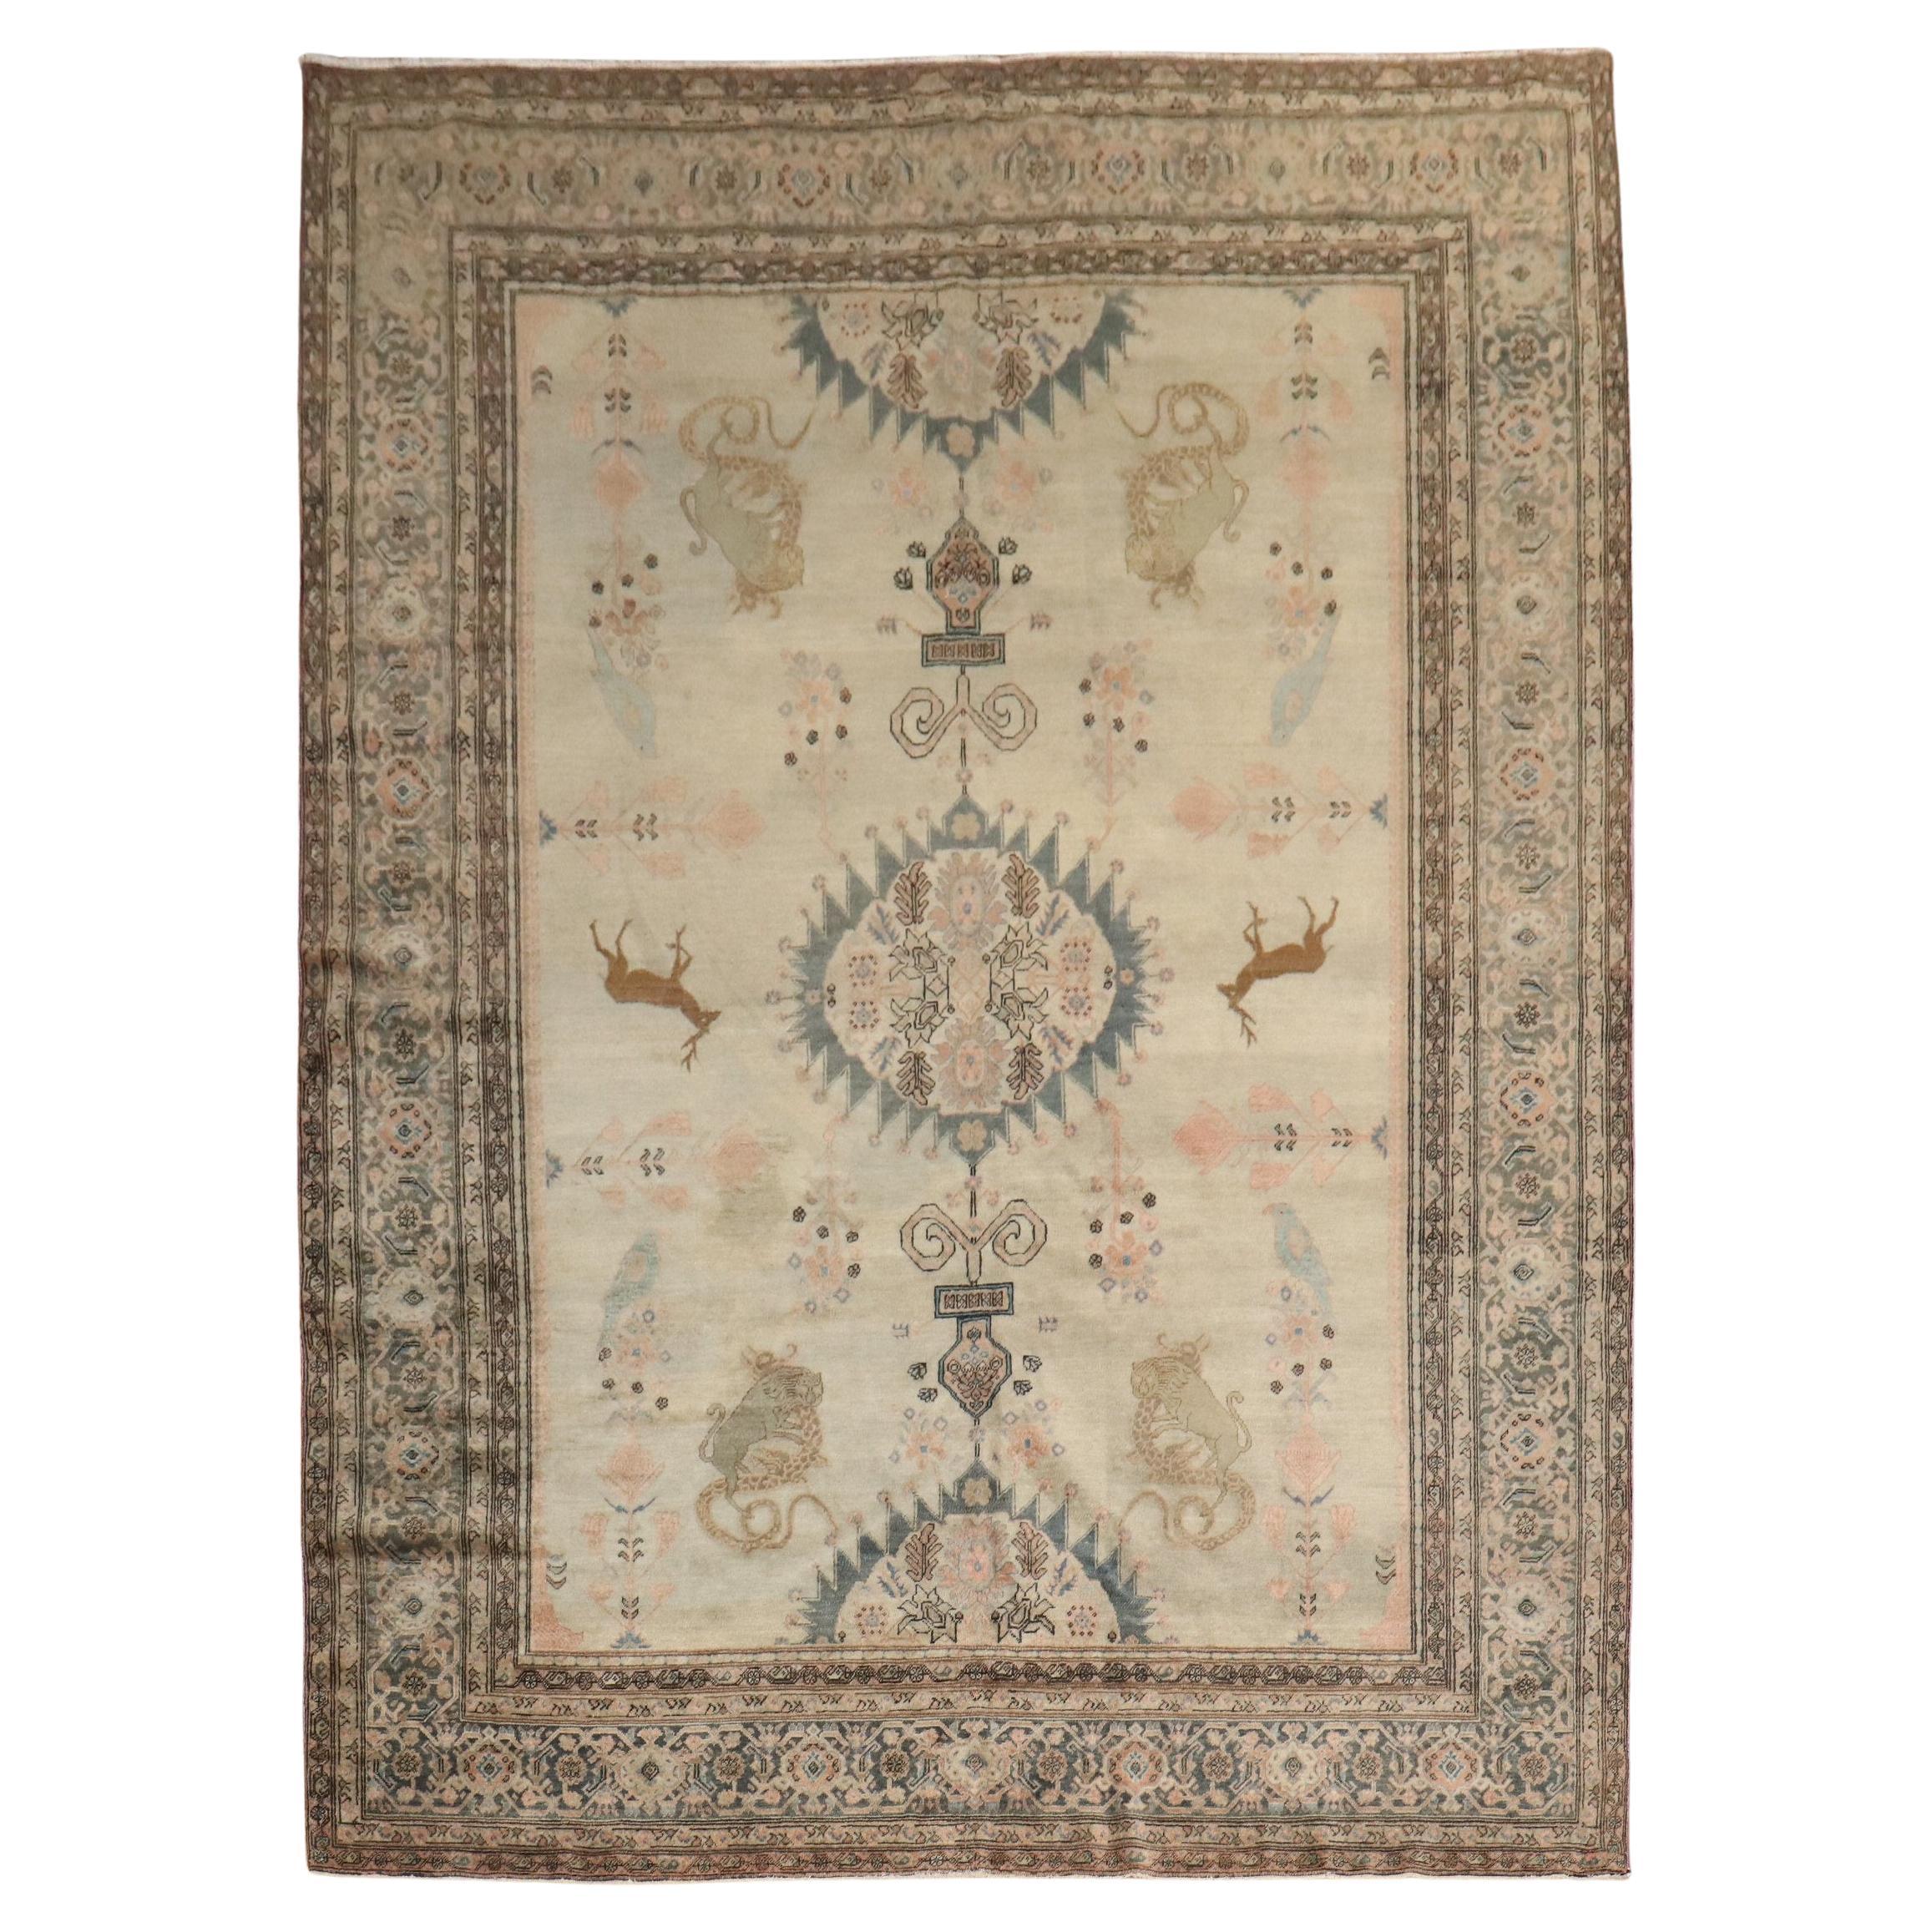 Zabihi Collection Antique Persian Sarouk Ferehan Pictorial Animal Rug For Sale